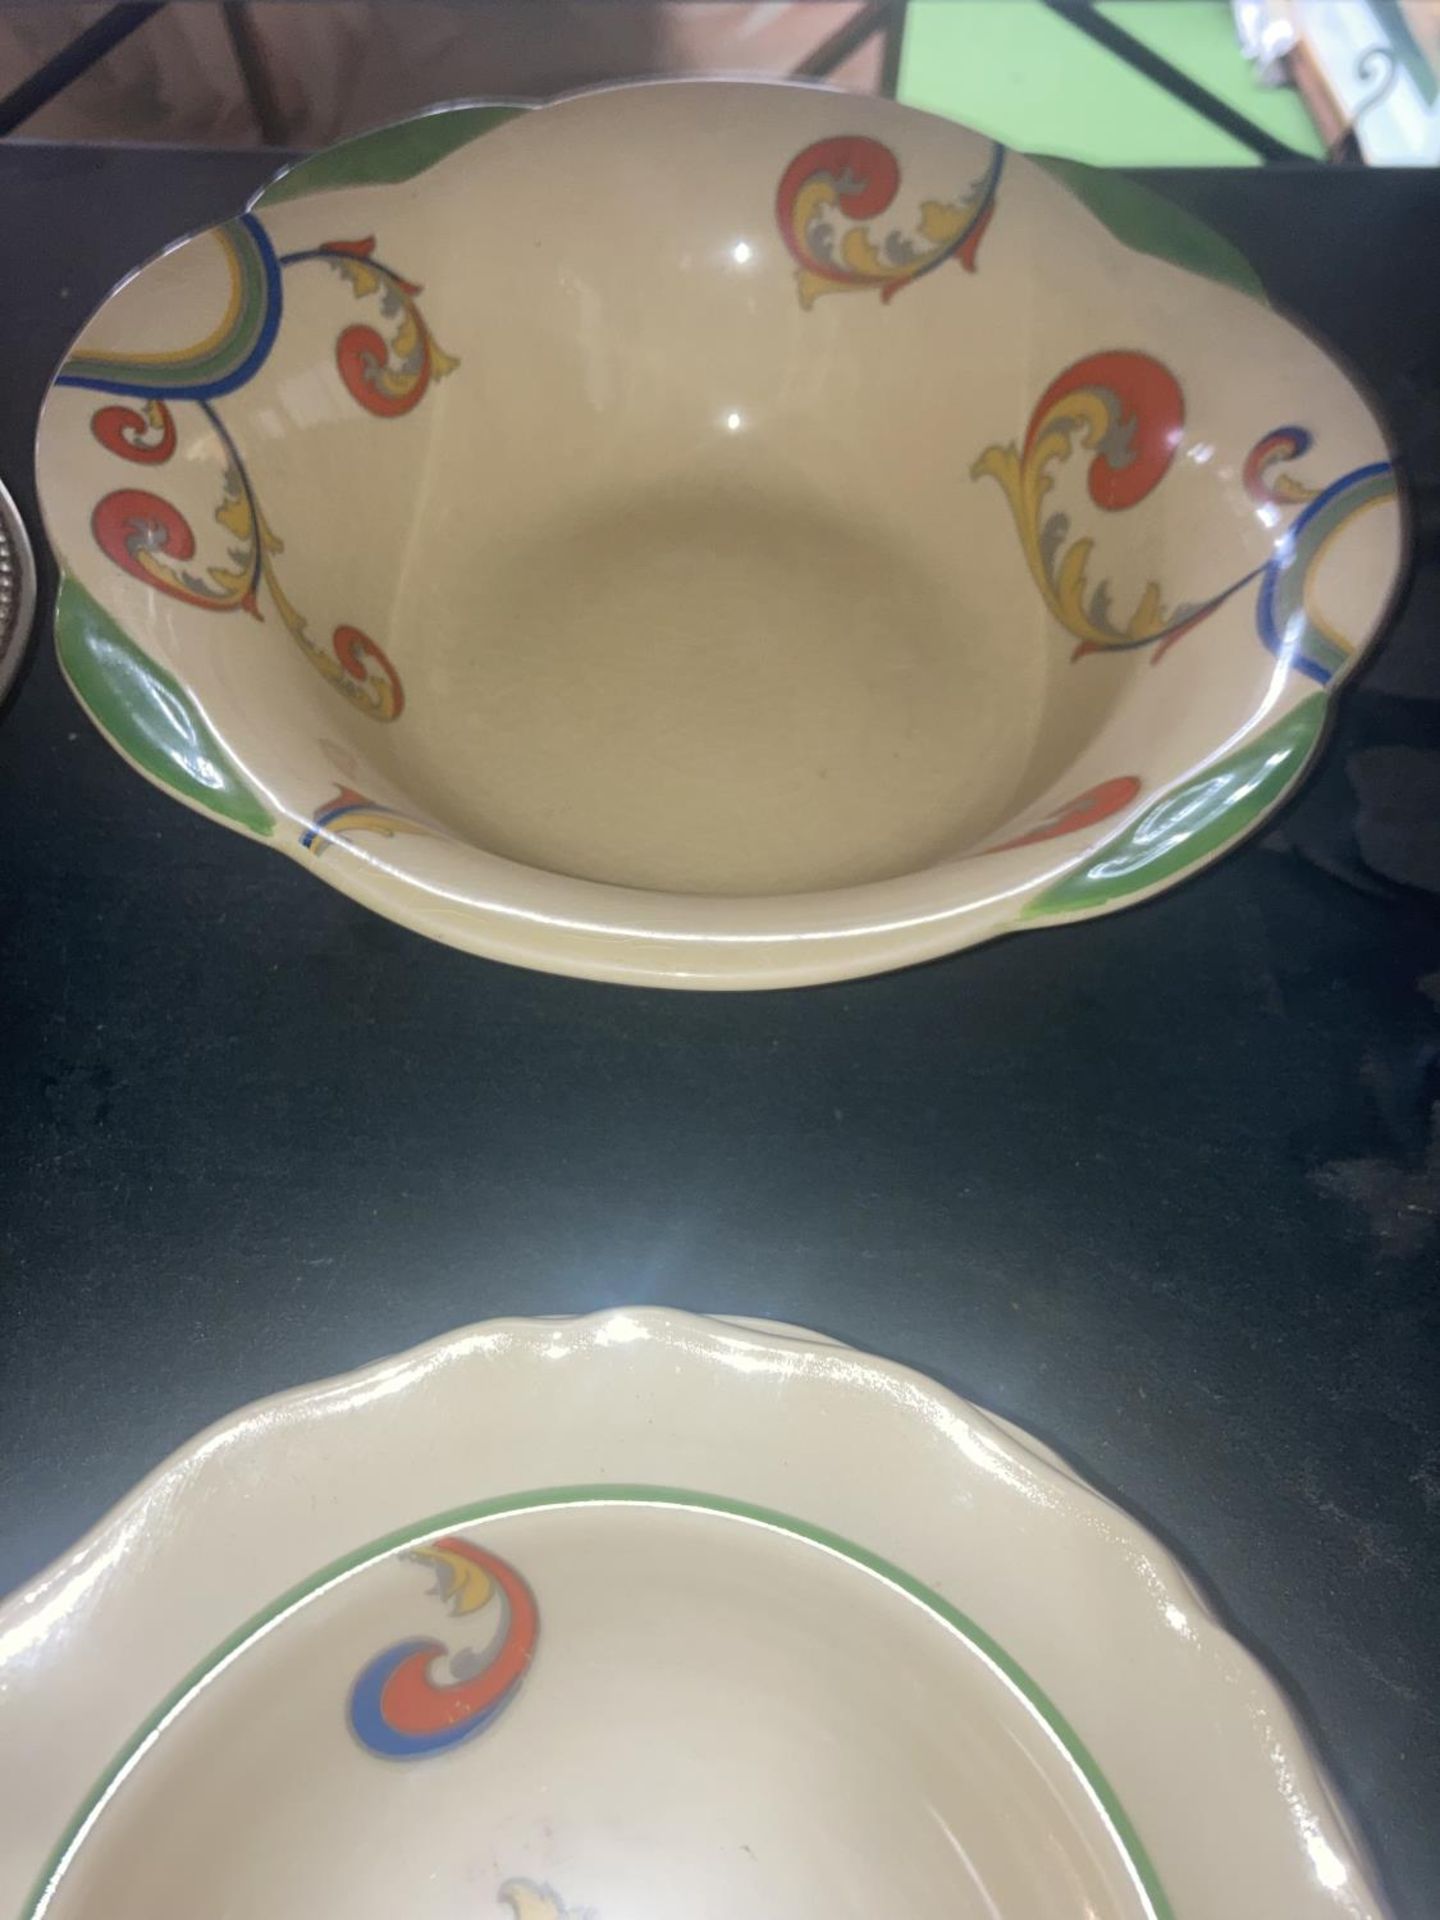 A QUANTITY OF ROYAL DOULTON 'SYREN' PATTERN NO. D.5102 BOWLS WITH 'CLARICE CLIFF' STYLE PATTERN - Image 2 of 3